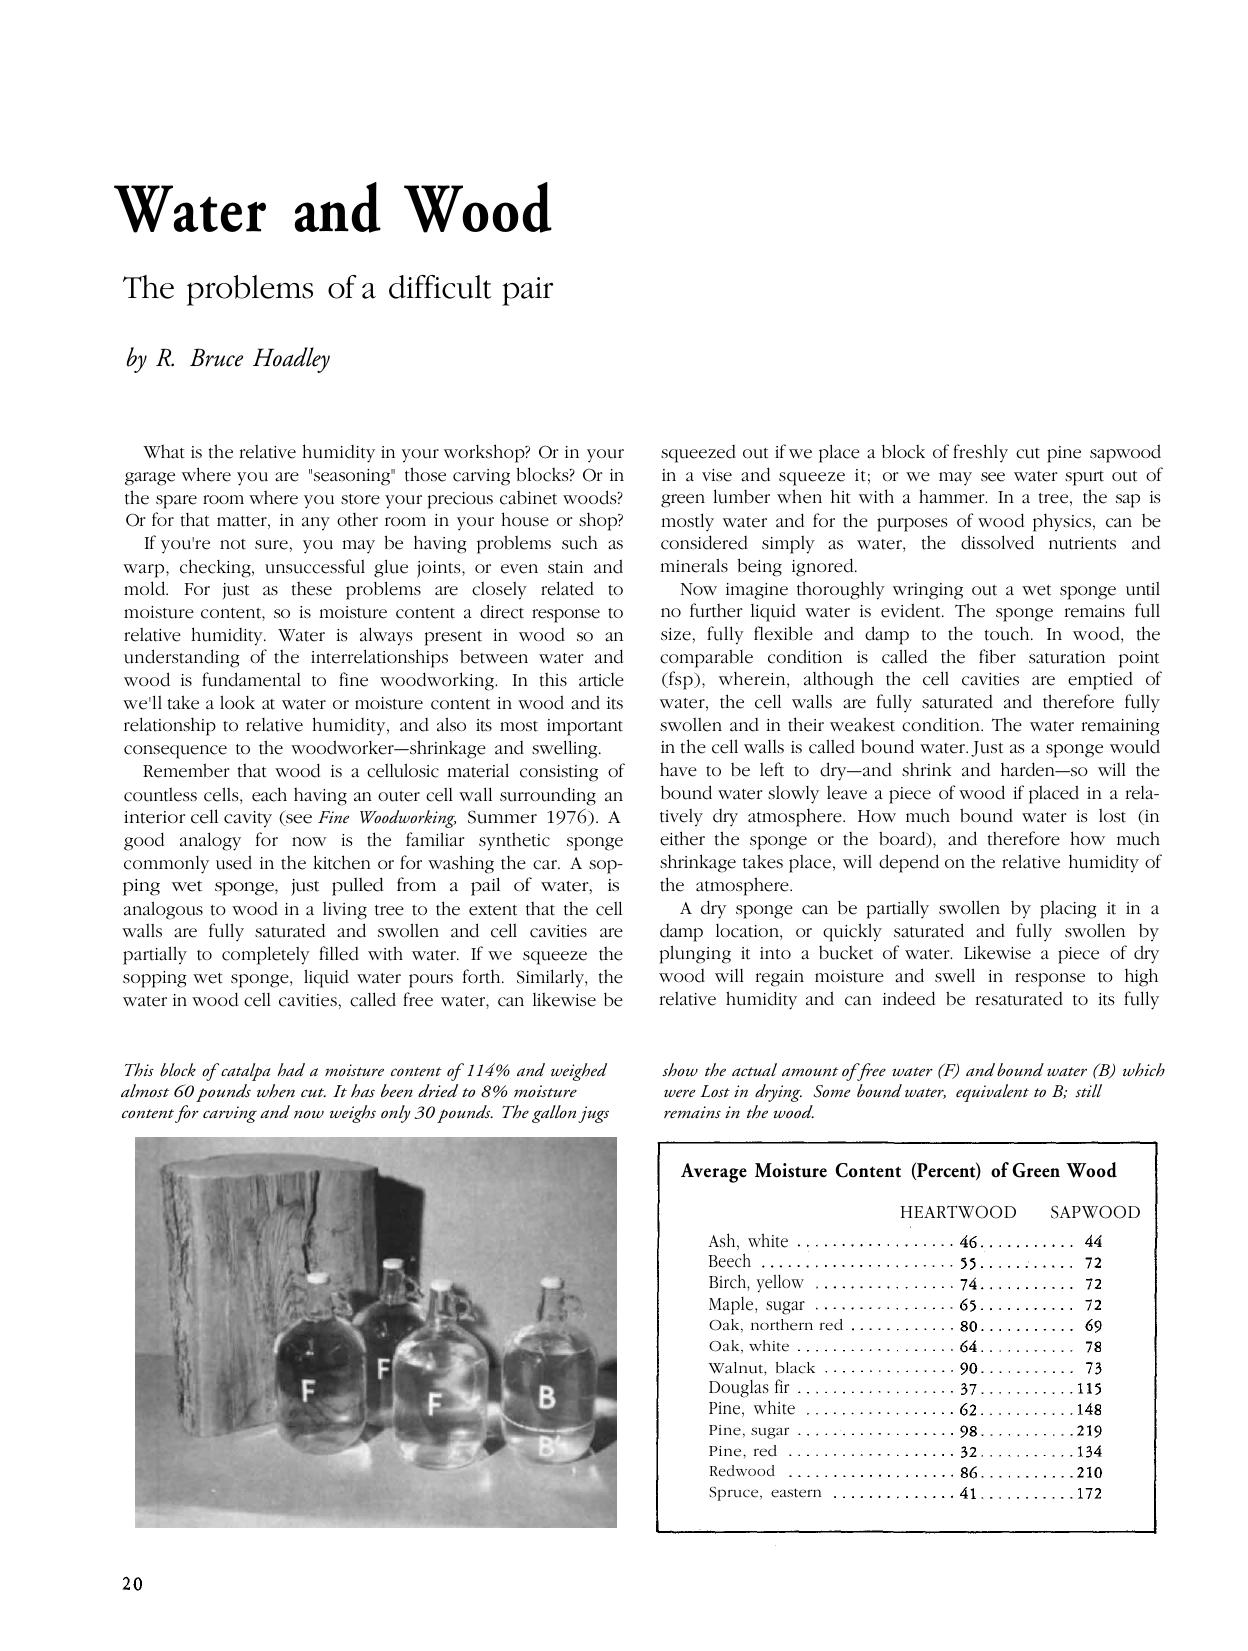 Water and Wood by R. Bruce Hoadley